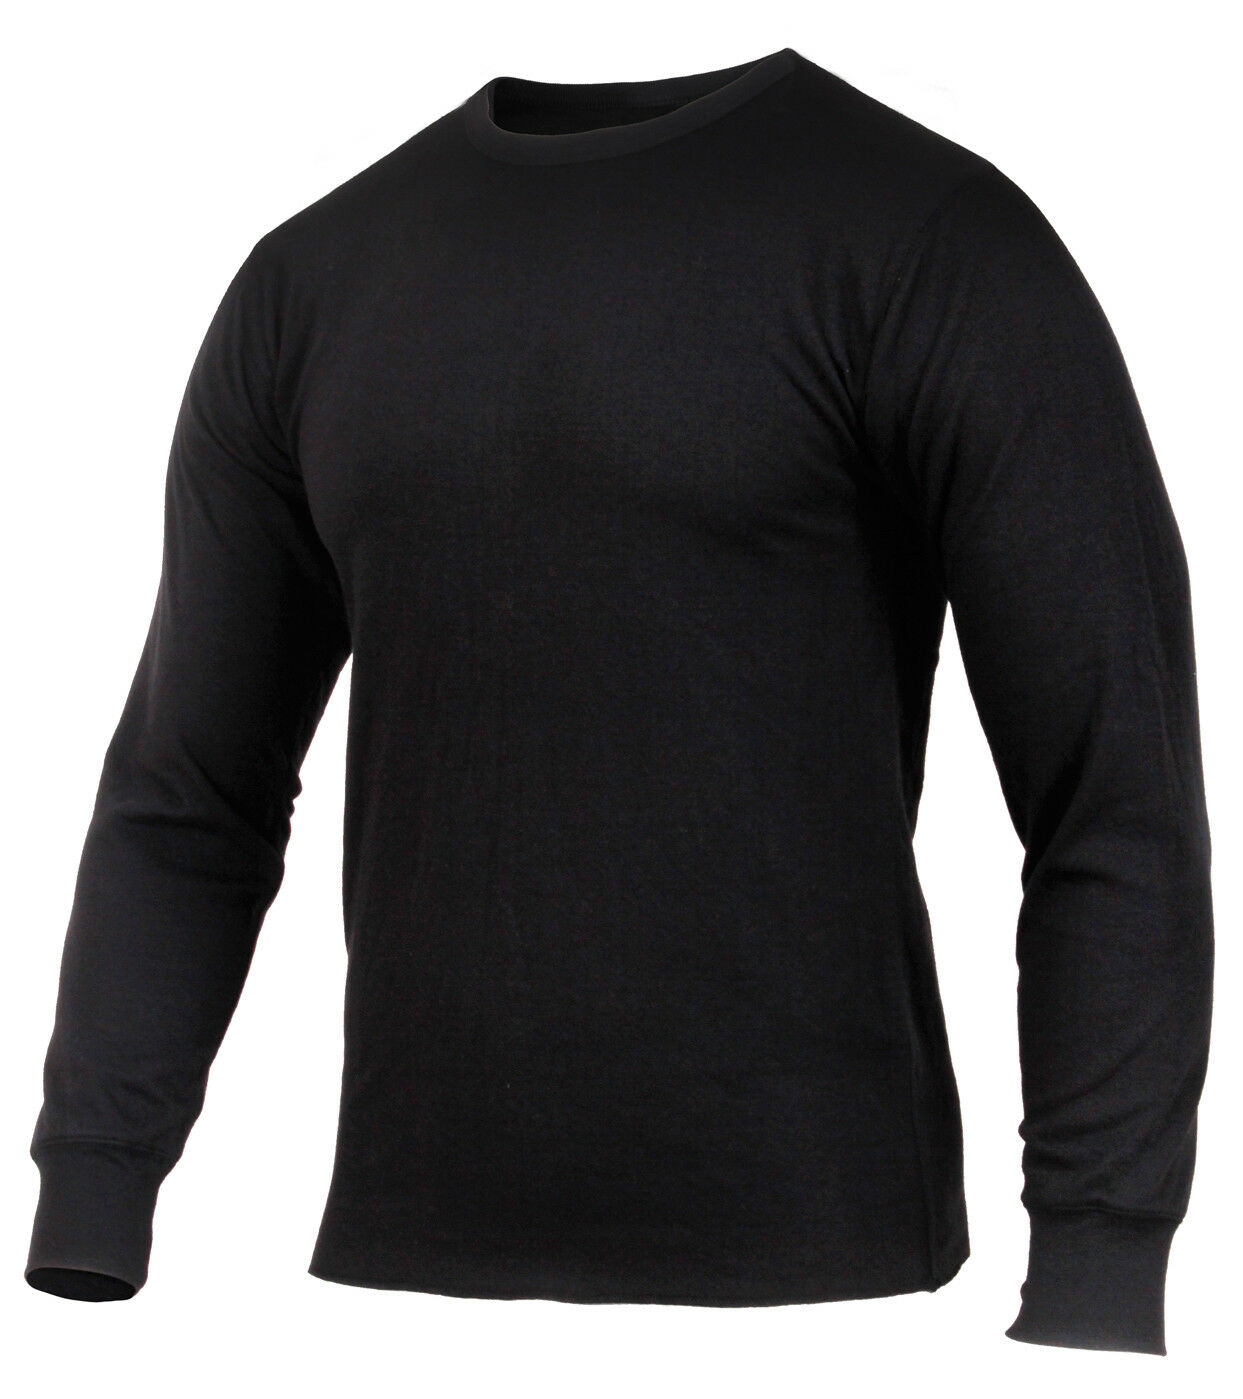 Thermal Cotton Polyester Top Shirt Long Sleeves Mid Weight Black Rothco 2827